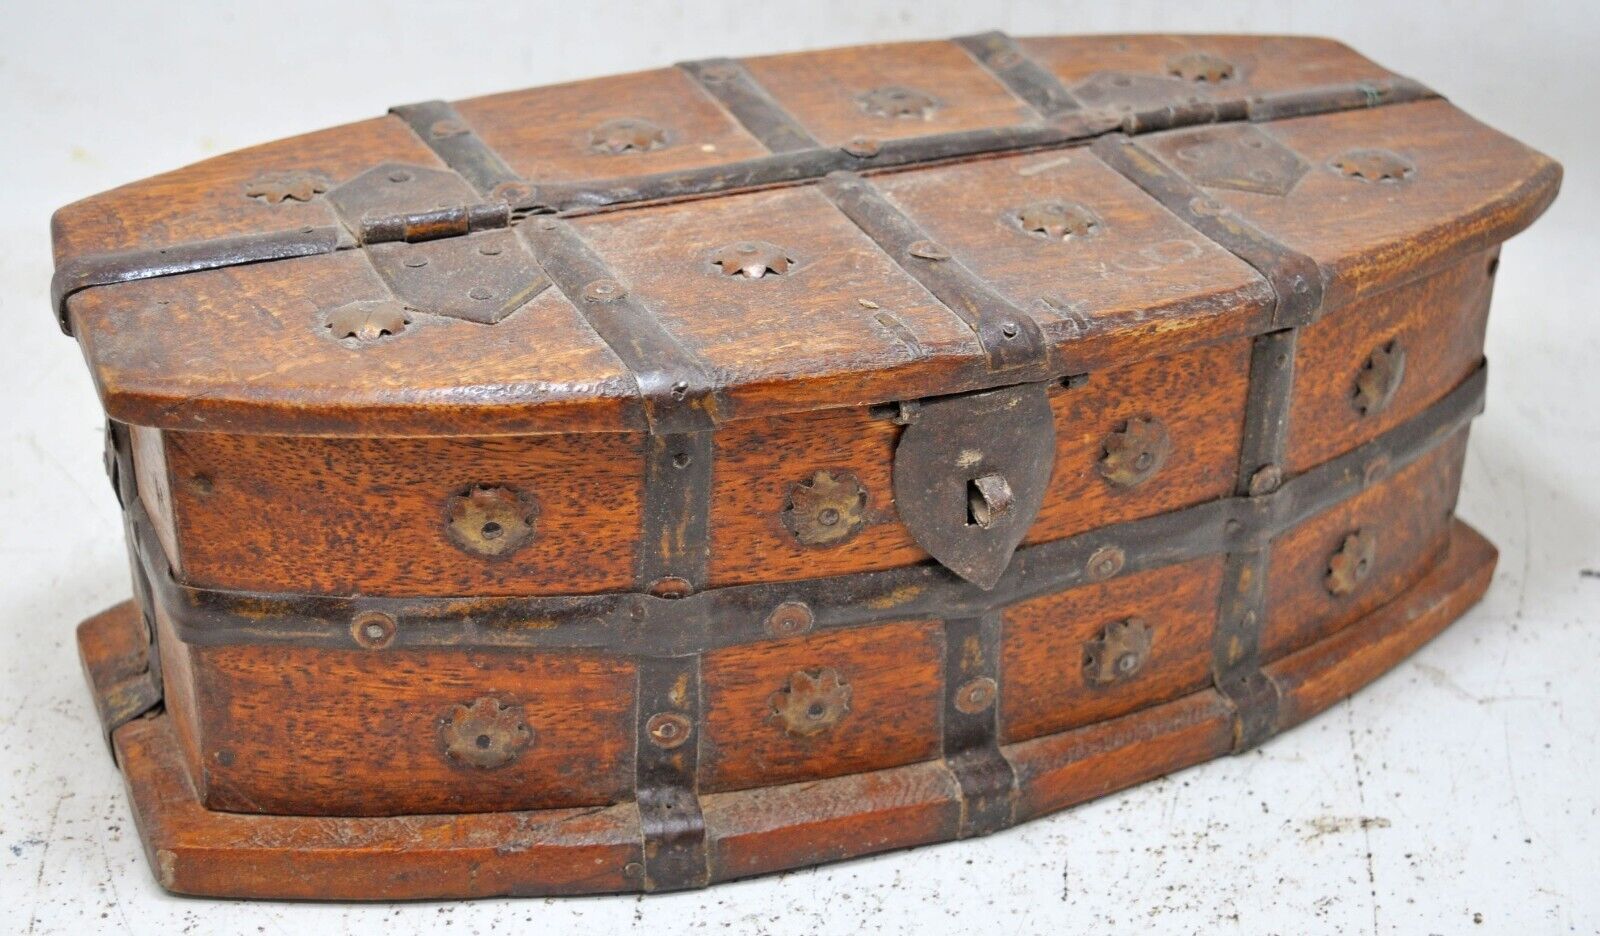 Vintage Wooden Oval Storage Box Original Old Hand Crafted Metal Fitted